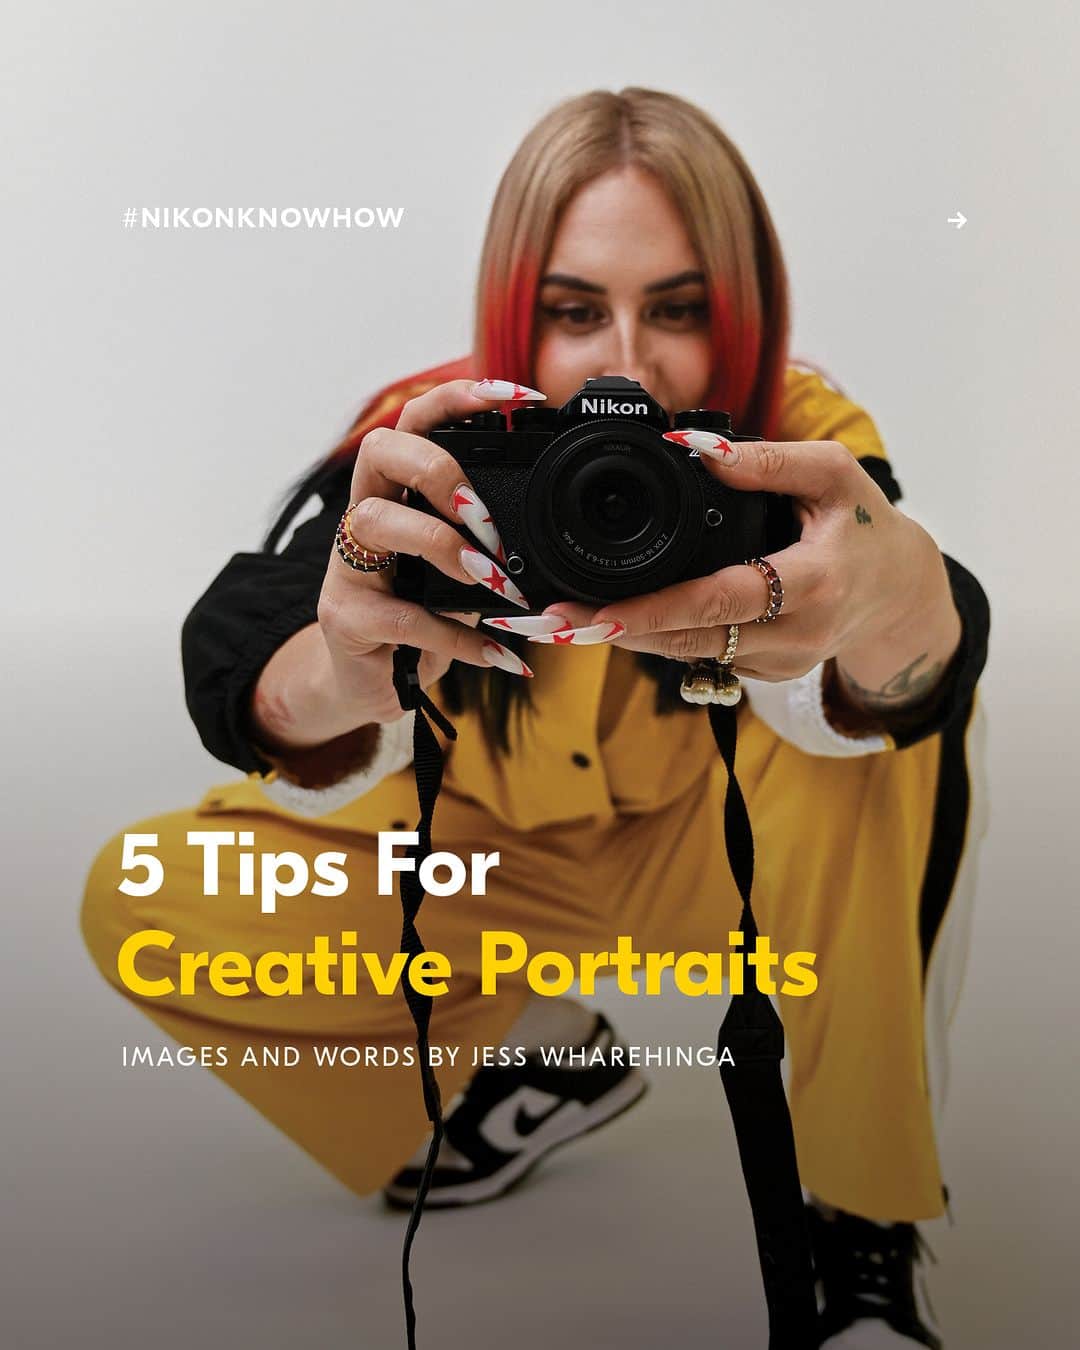 Nikon Australiaのインスタグラム：「Want to learn how to level up your portrait photography game?   Read along as @jesswharehinga shares her top tips for getting creative with portraits.   Swipe to read more!  #Nikon #NikonAustralia #MyNikonLife #NikonKnowHow #PortraitPhotography #FashionPhotography」